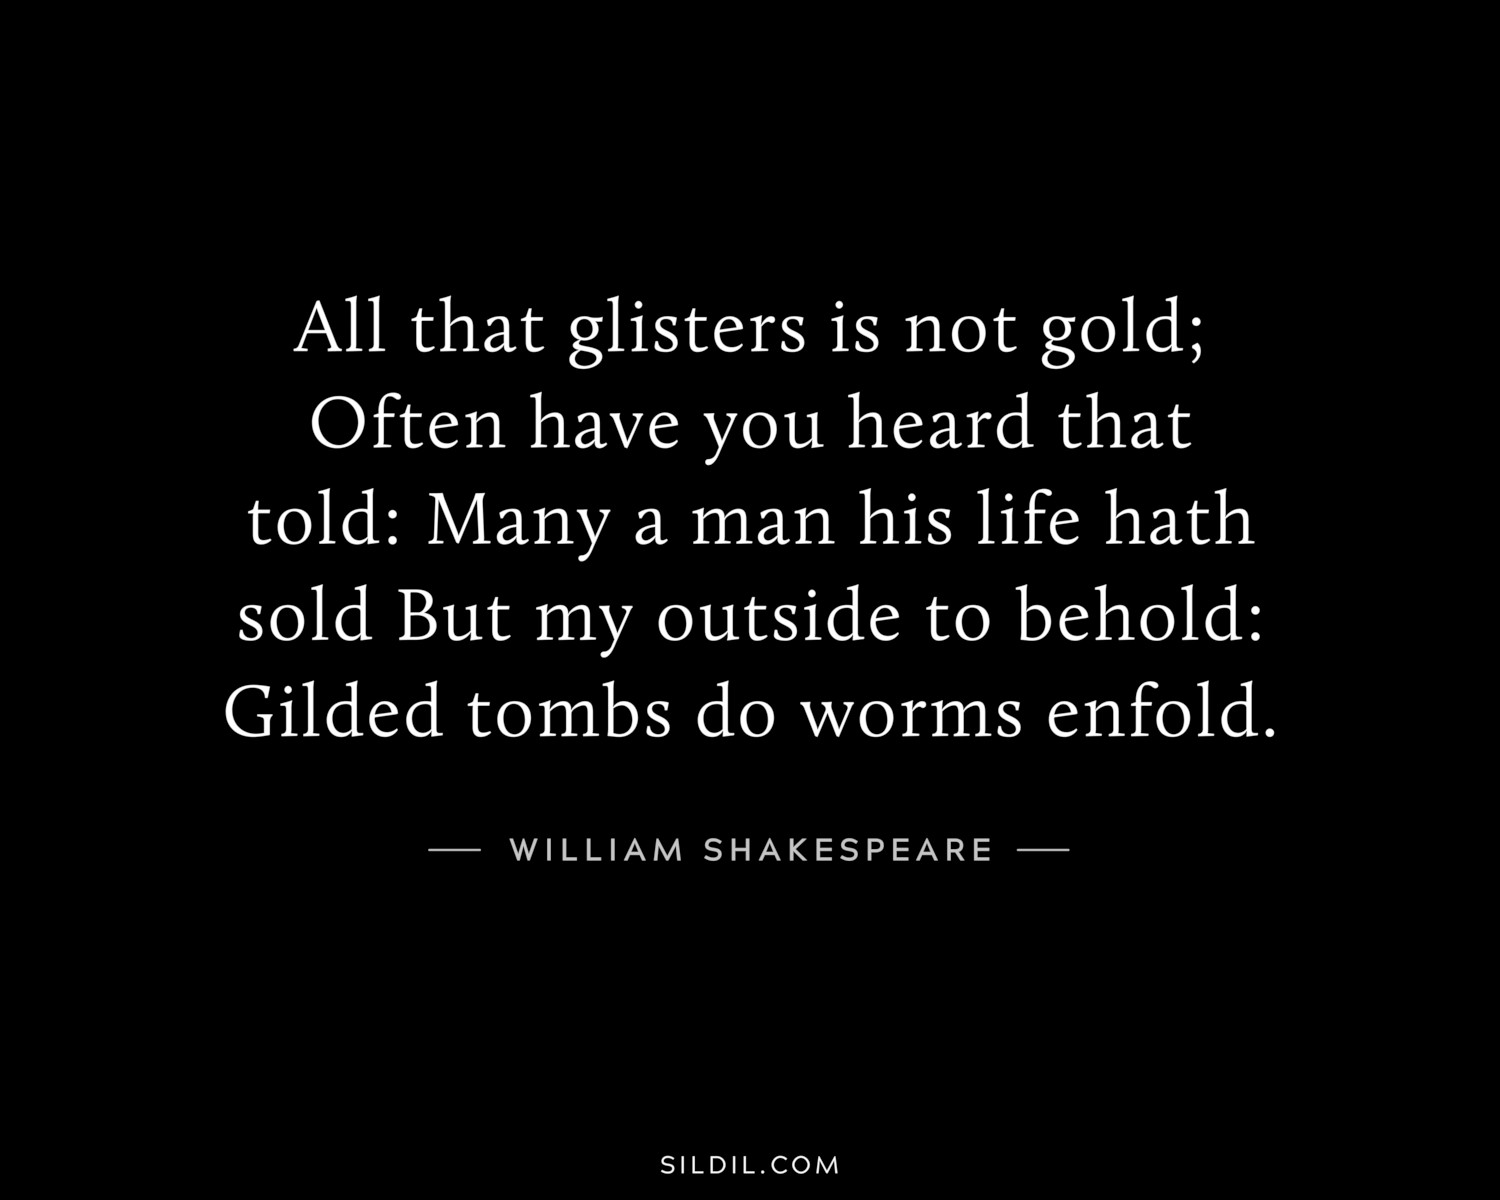 All that glisters is not gold; Often have you heard that told: Many a man his life hath sold But my outside to behold: Gilded tombs do worms enfold.